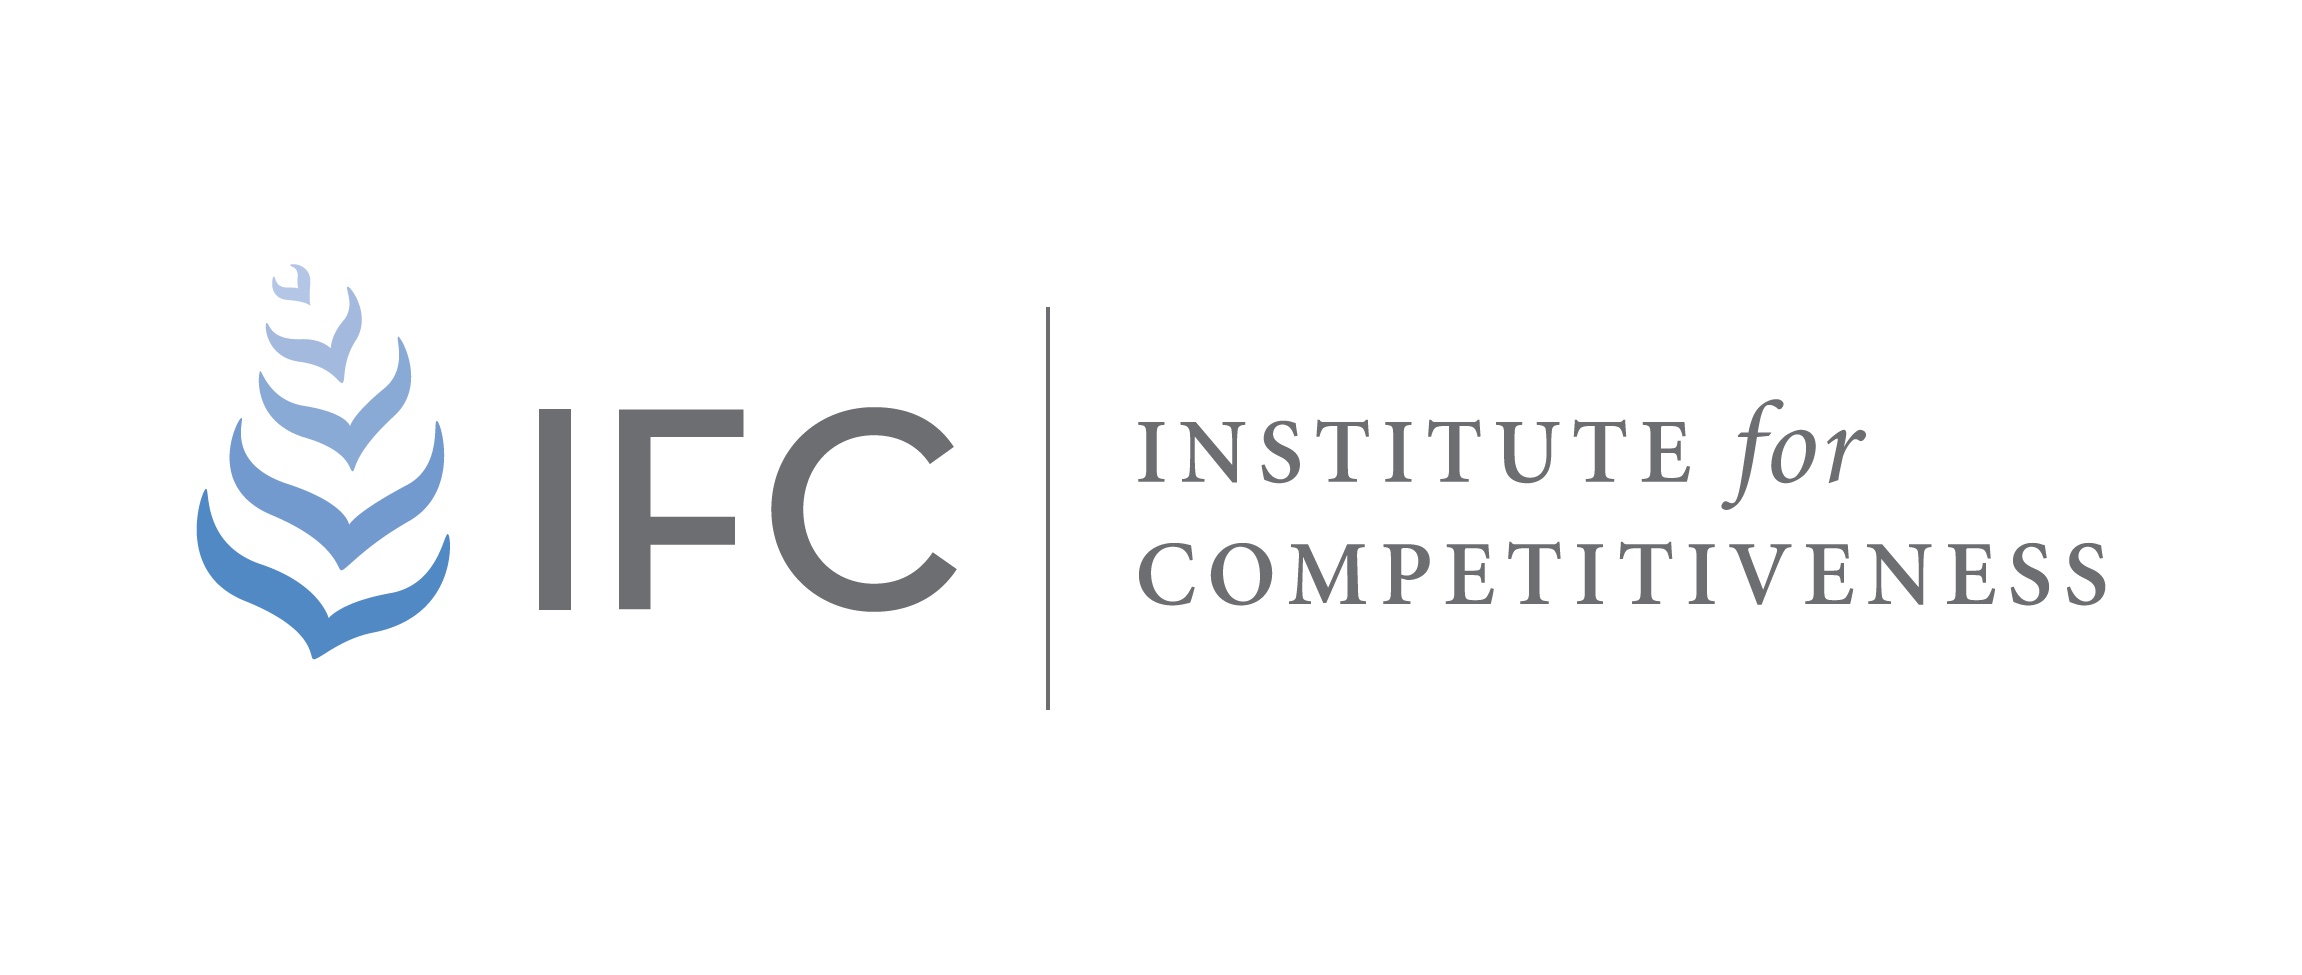 Institute for Competitiveness